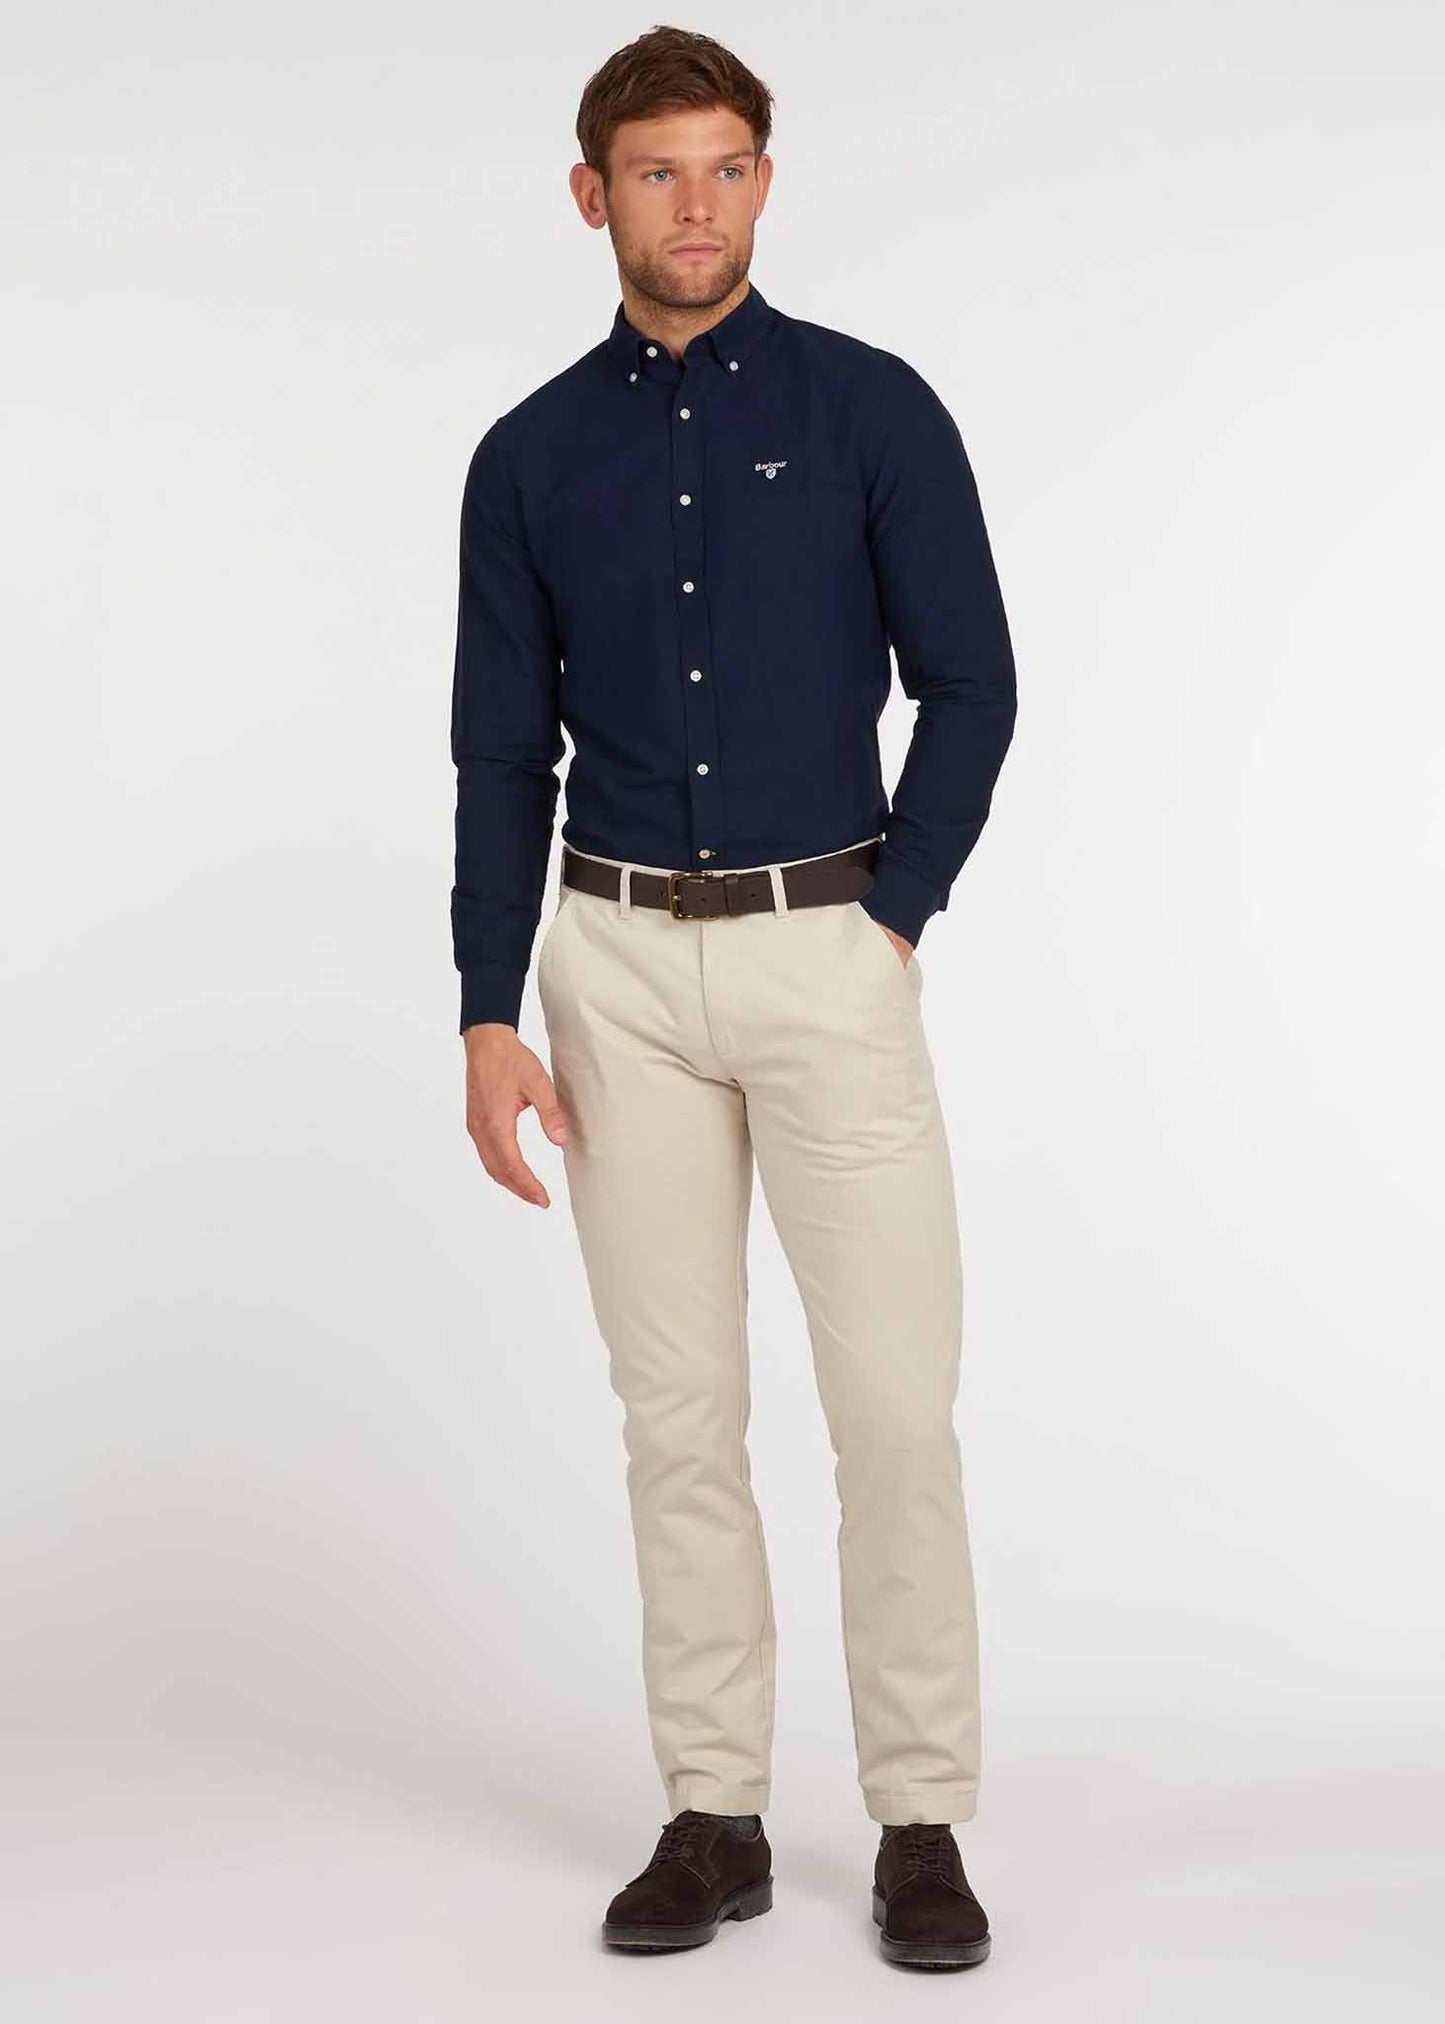 Oxford 3 tailored shirt - navy